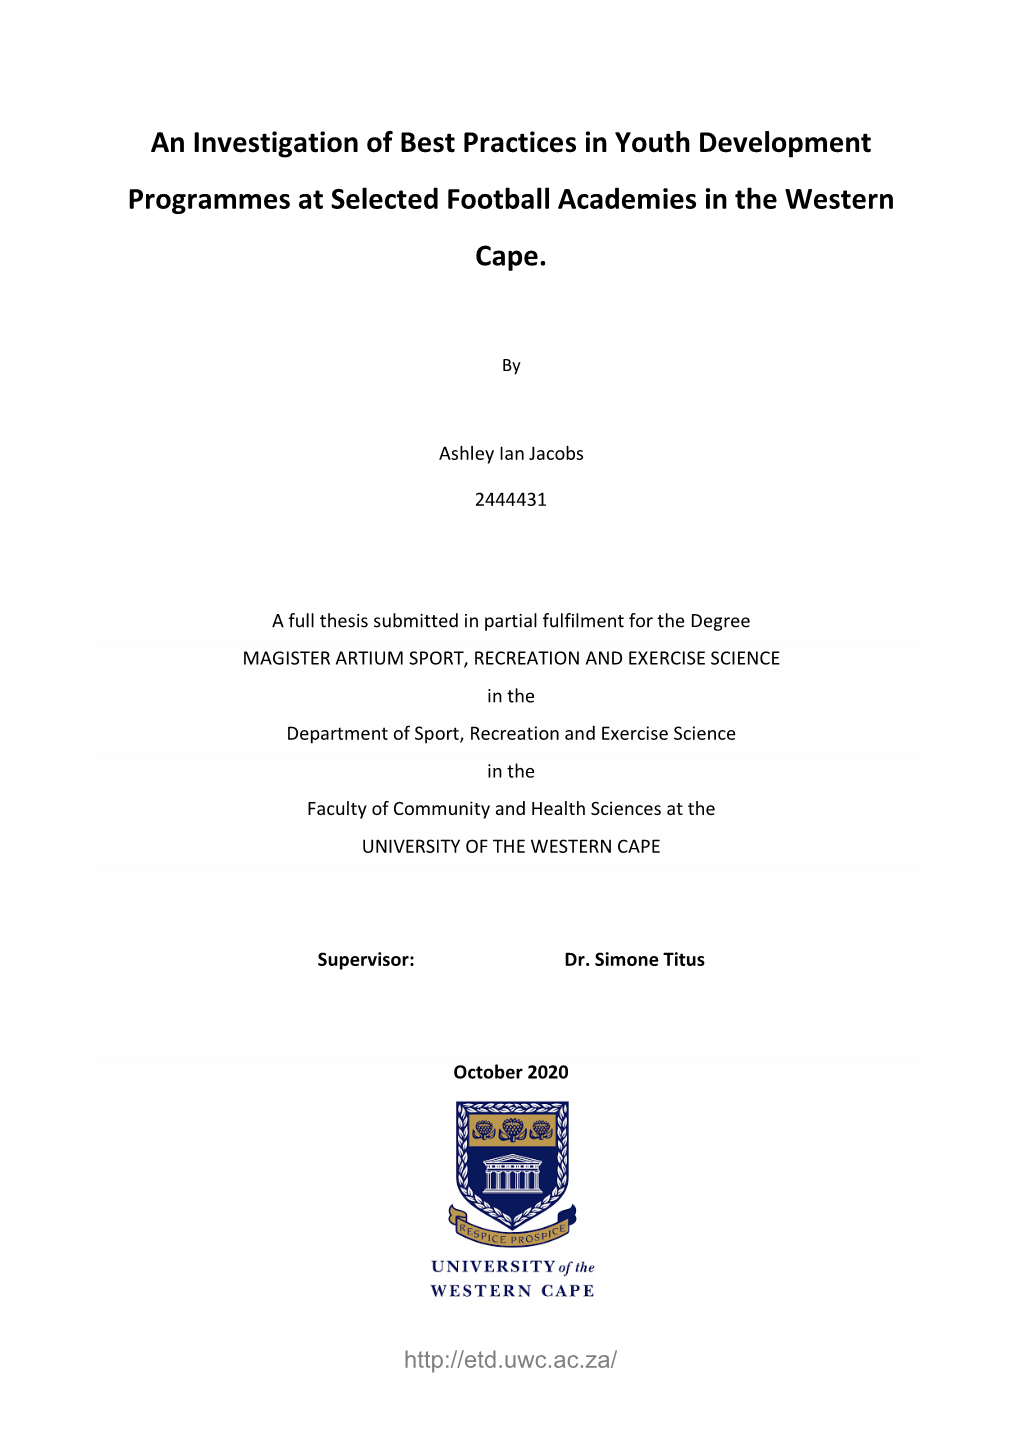 An Investigation of Best Practices in Youth Development Programmes at Selected Football Academies in the Western Cape